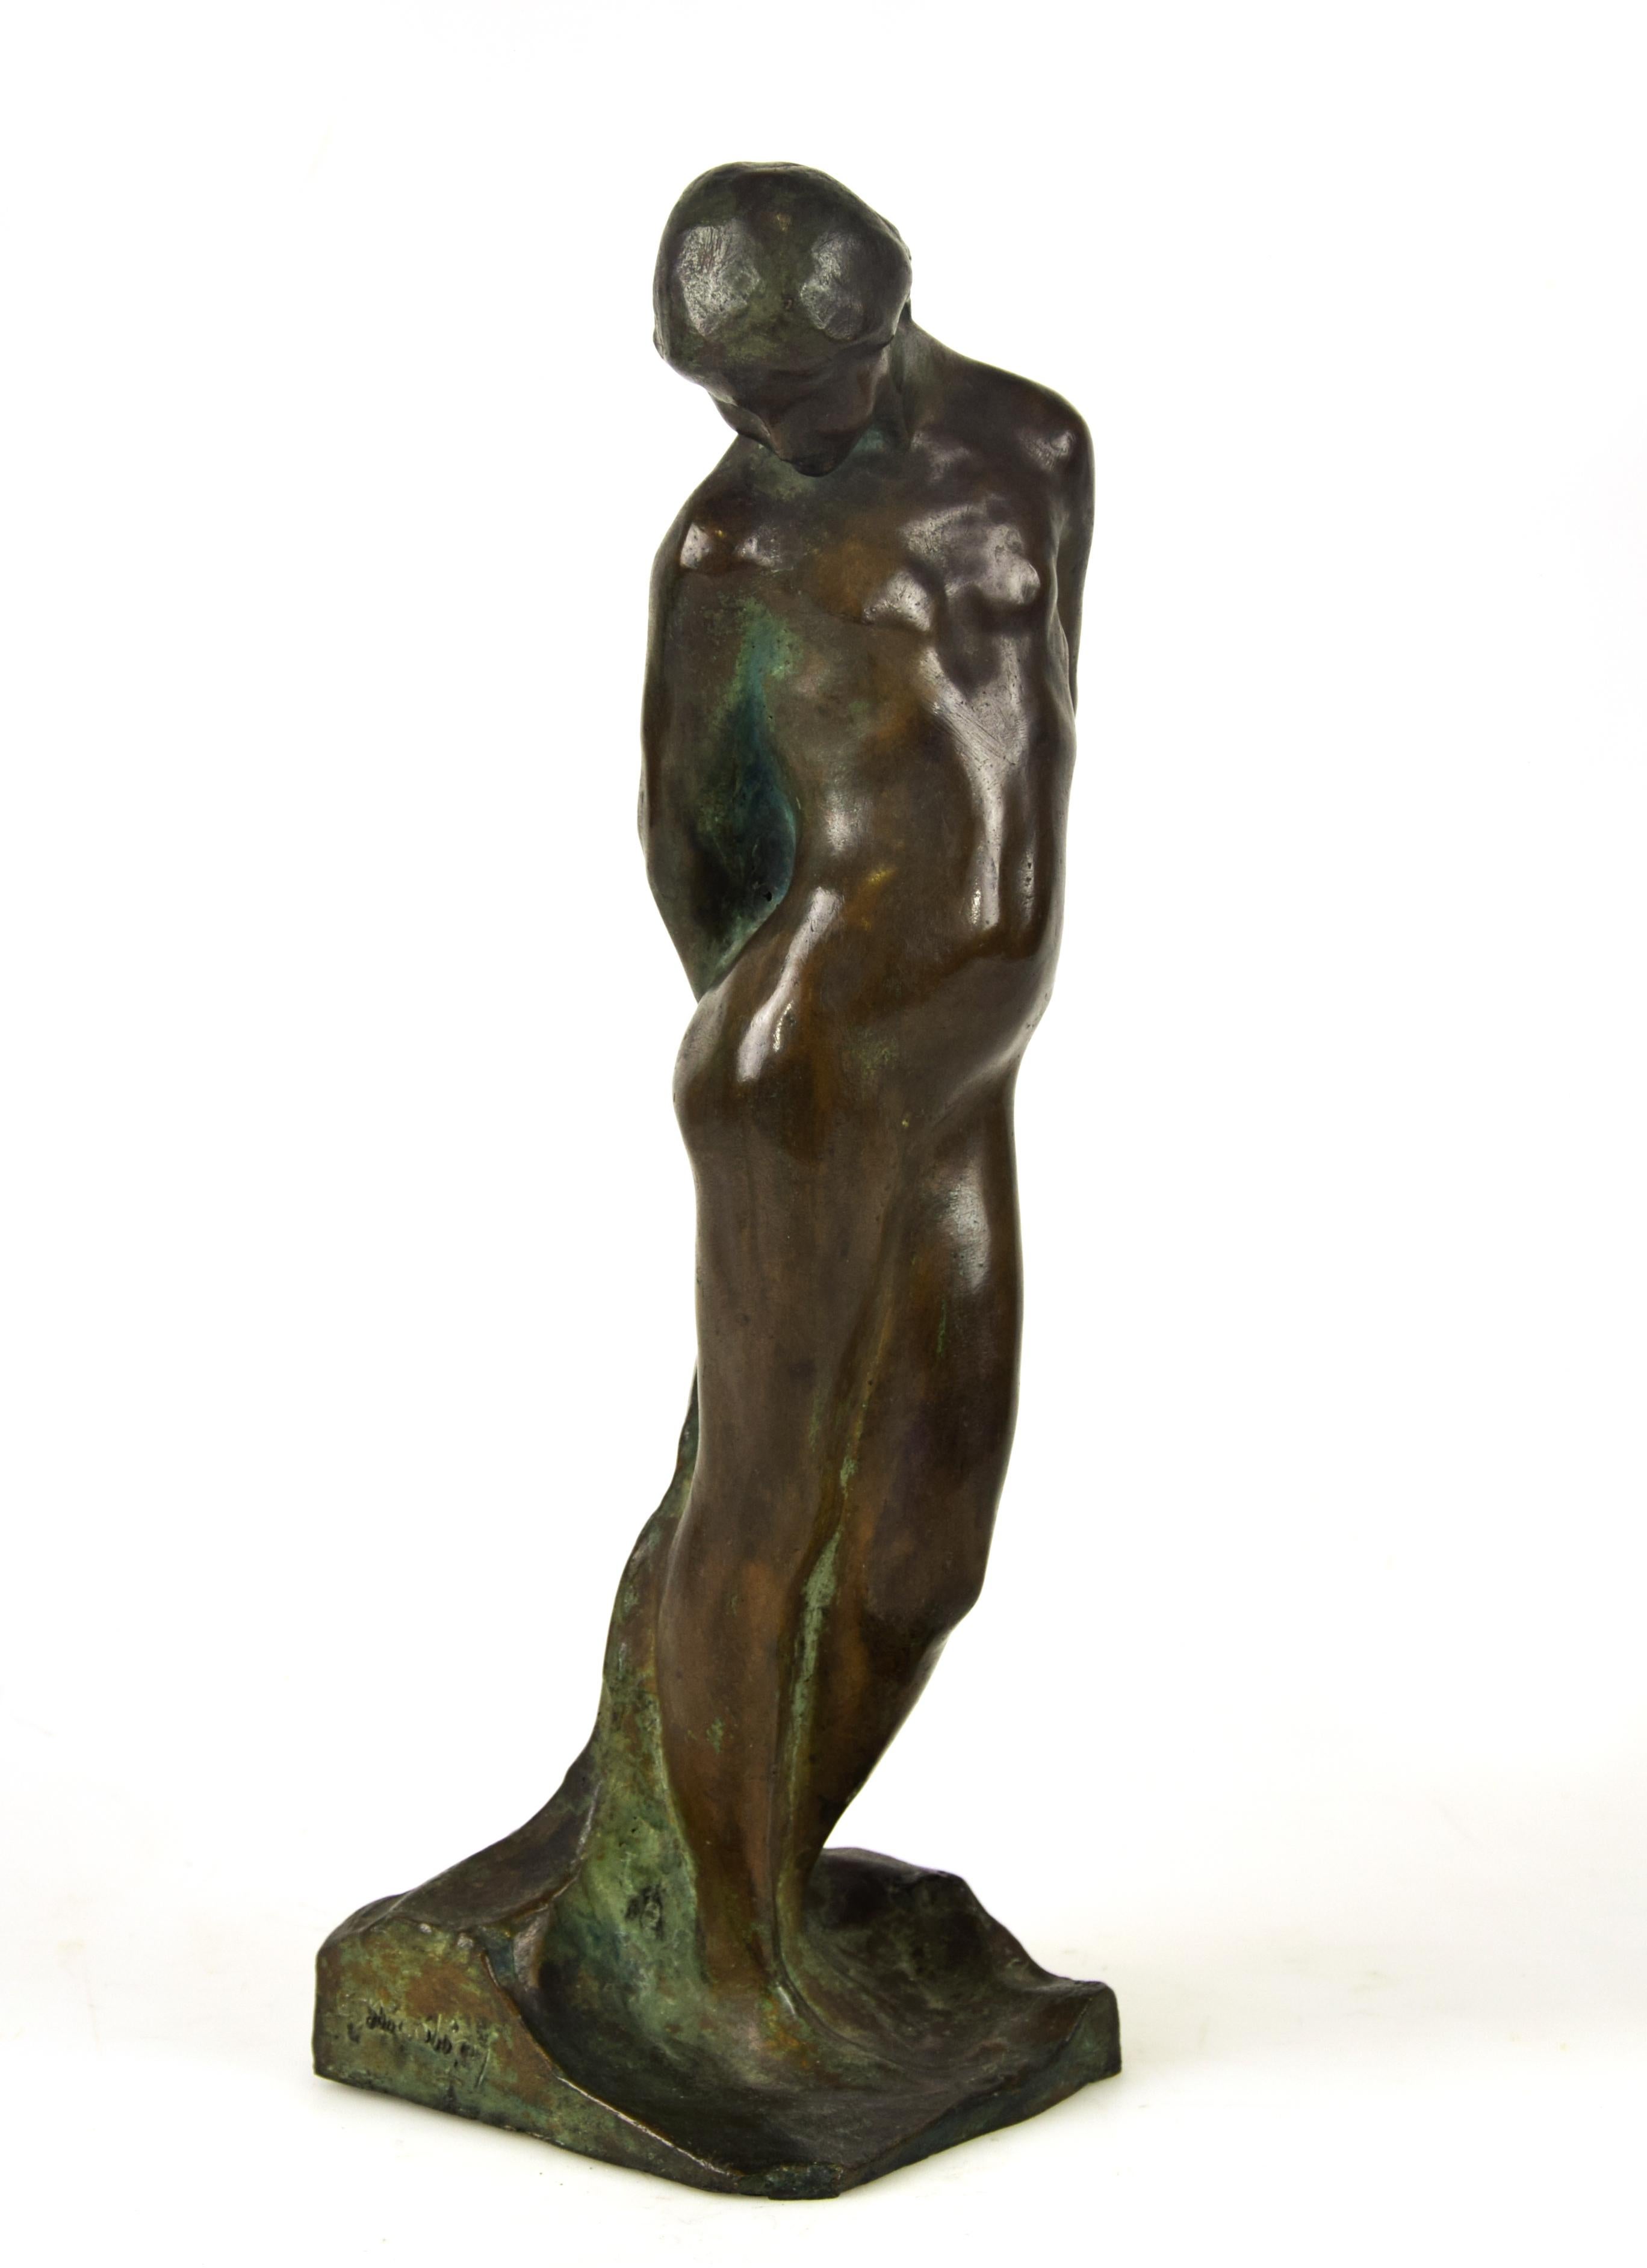 Saint Sebastian is an original bronze sculpture realized by Giovanni Nicolini (1872-1956) in the 1950s.

Beautiful bronze sculpture representing the Saint Sebastian.

Signed on base.

This object is shipped from Italy. Under existing